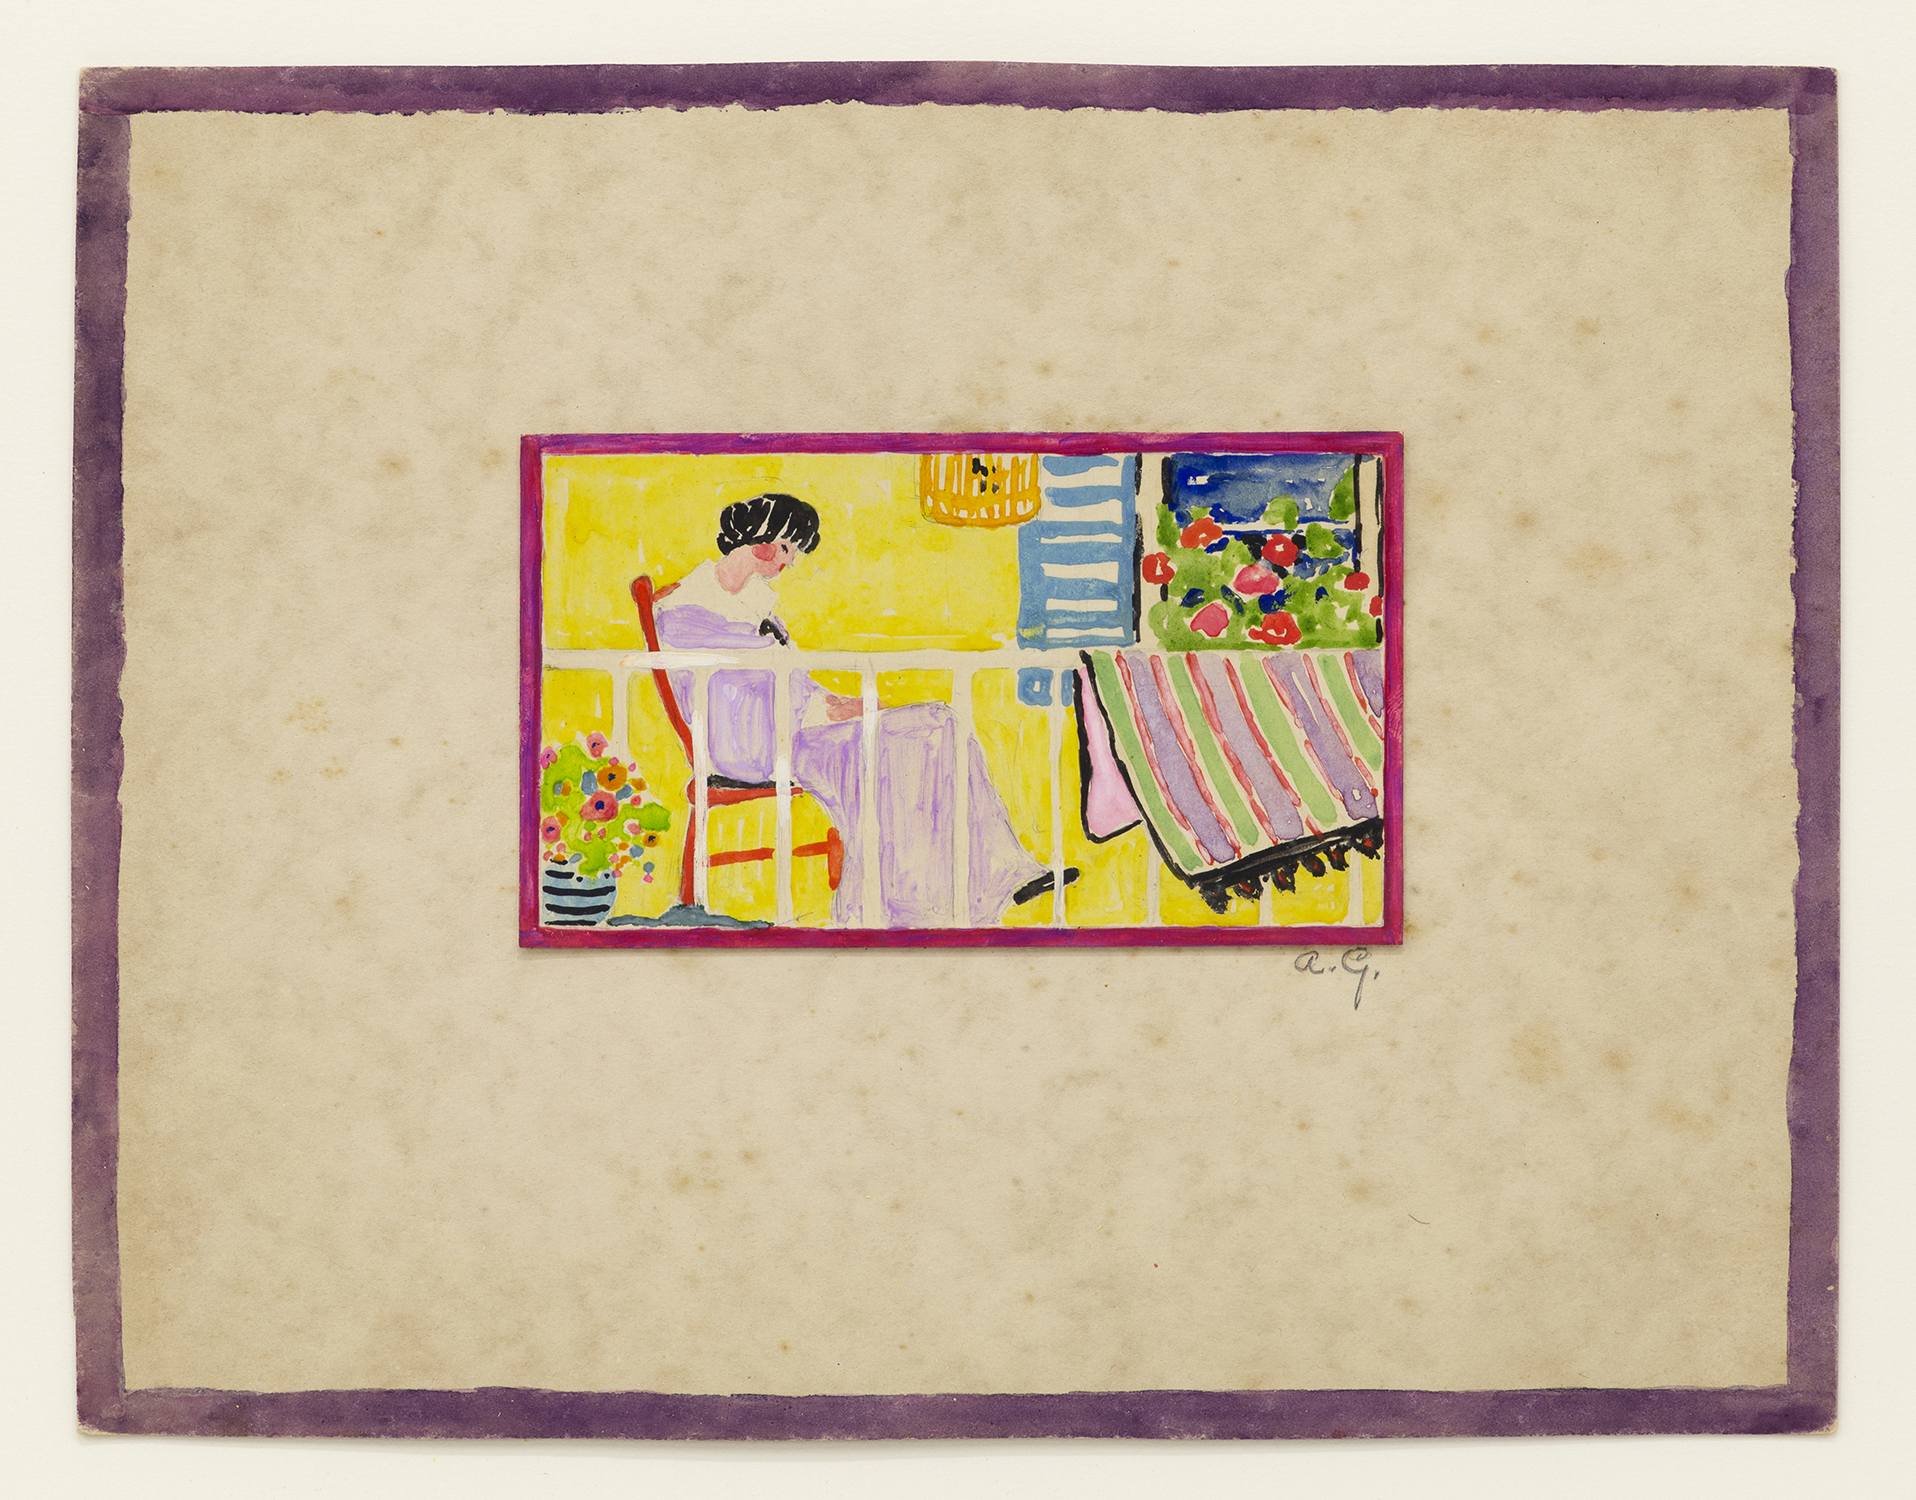 Untitled (On the Porch with Striped Rug), 1915, Watercolor, 8 3/4 x 11 1/8 inches (22.2 x 28.3 cm)